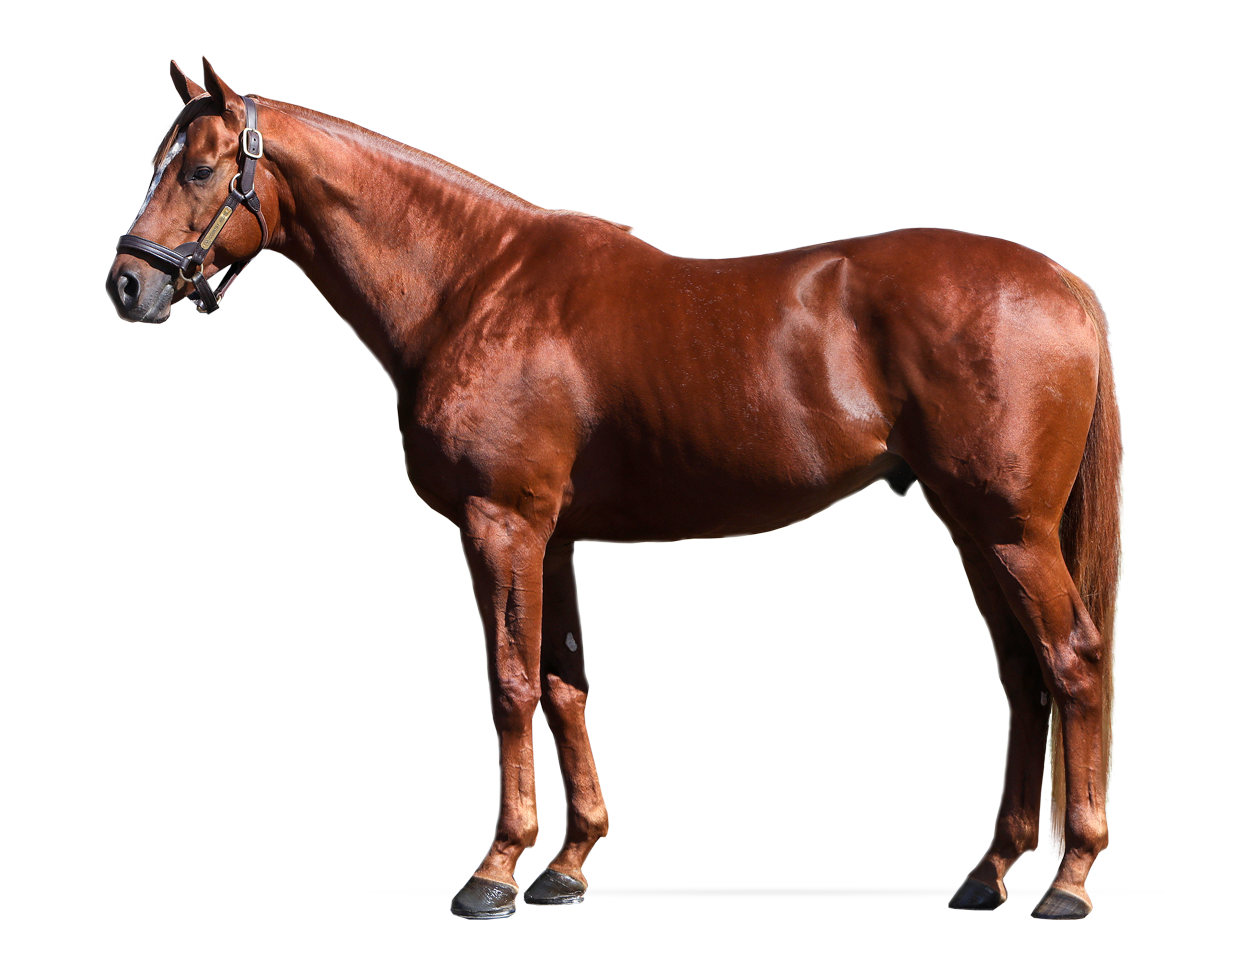 First mare confirmed in foal to Kentucky Derby winner Country House â Darby Dan Farm